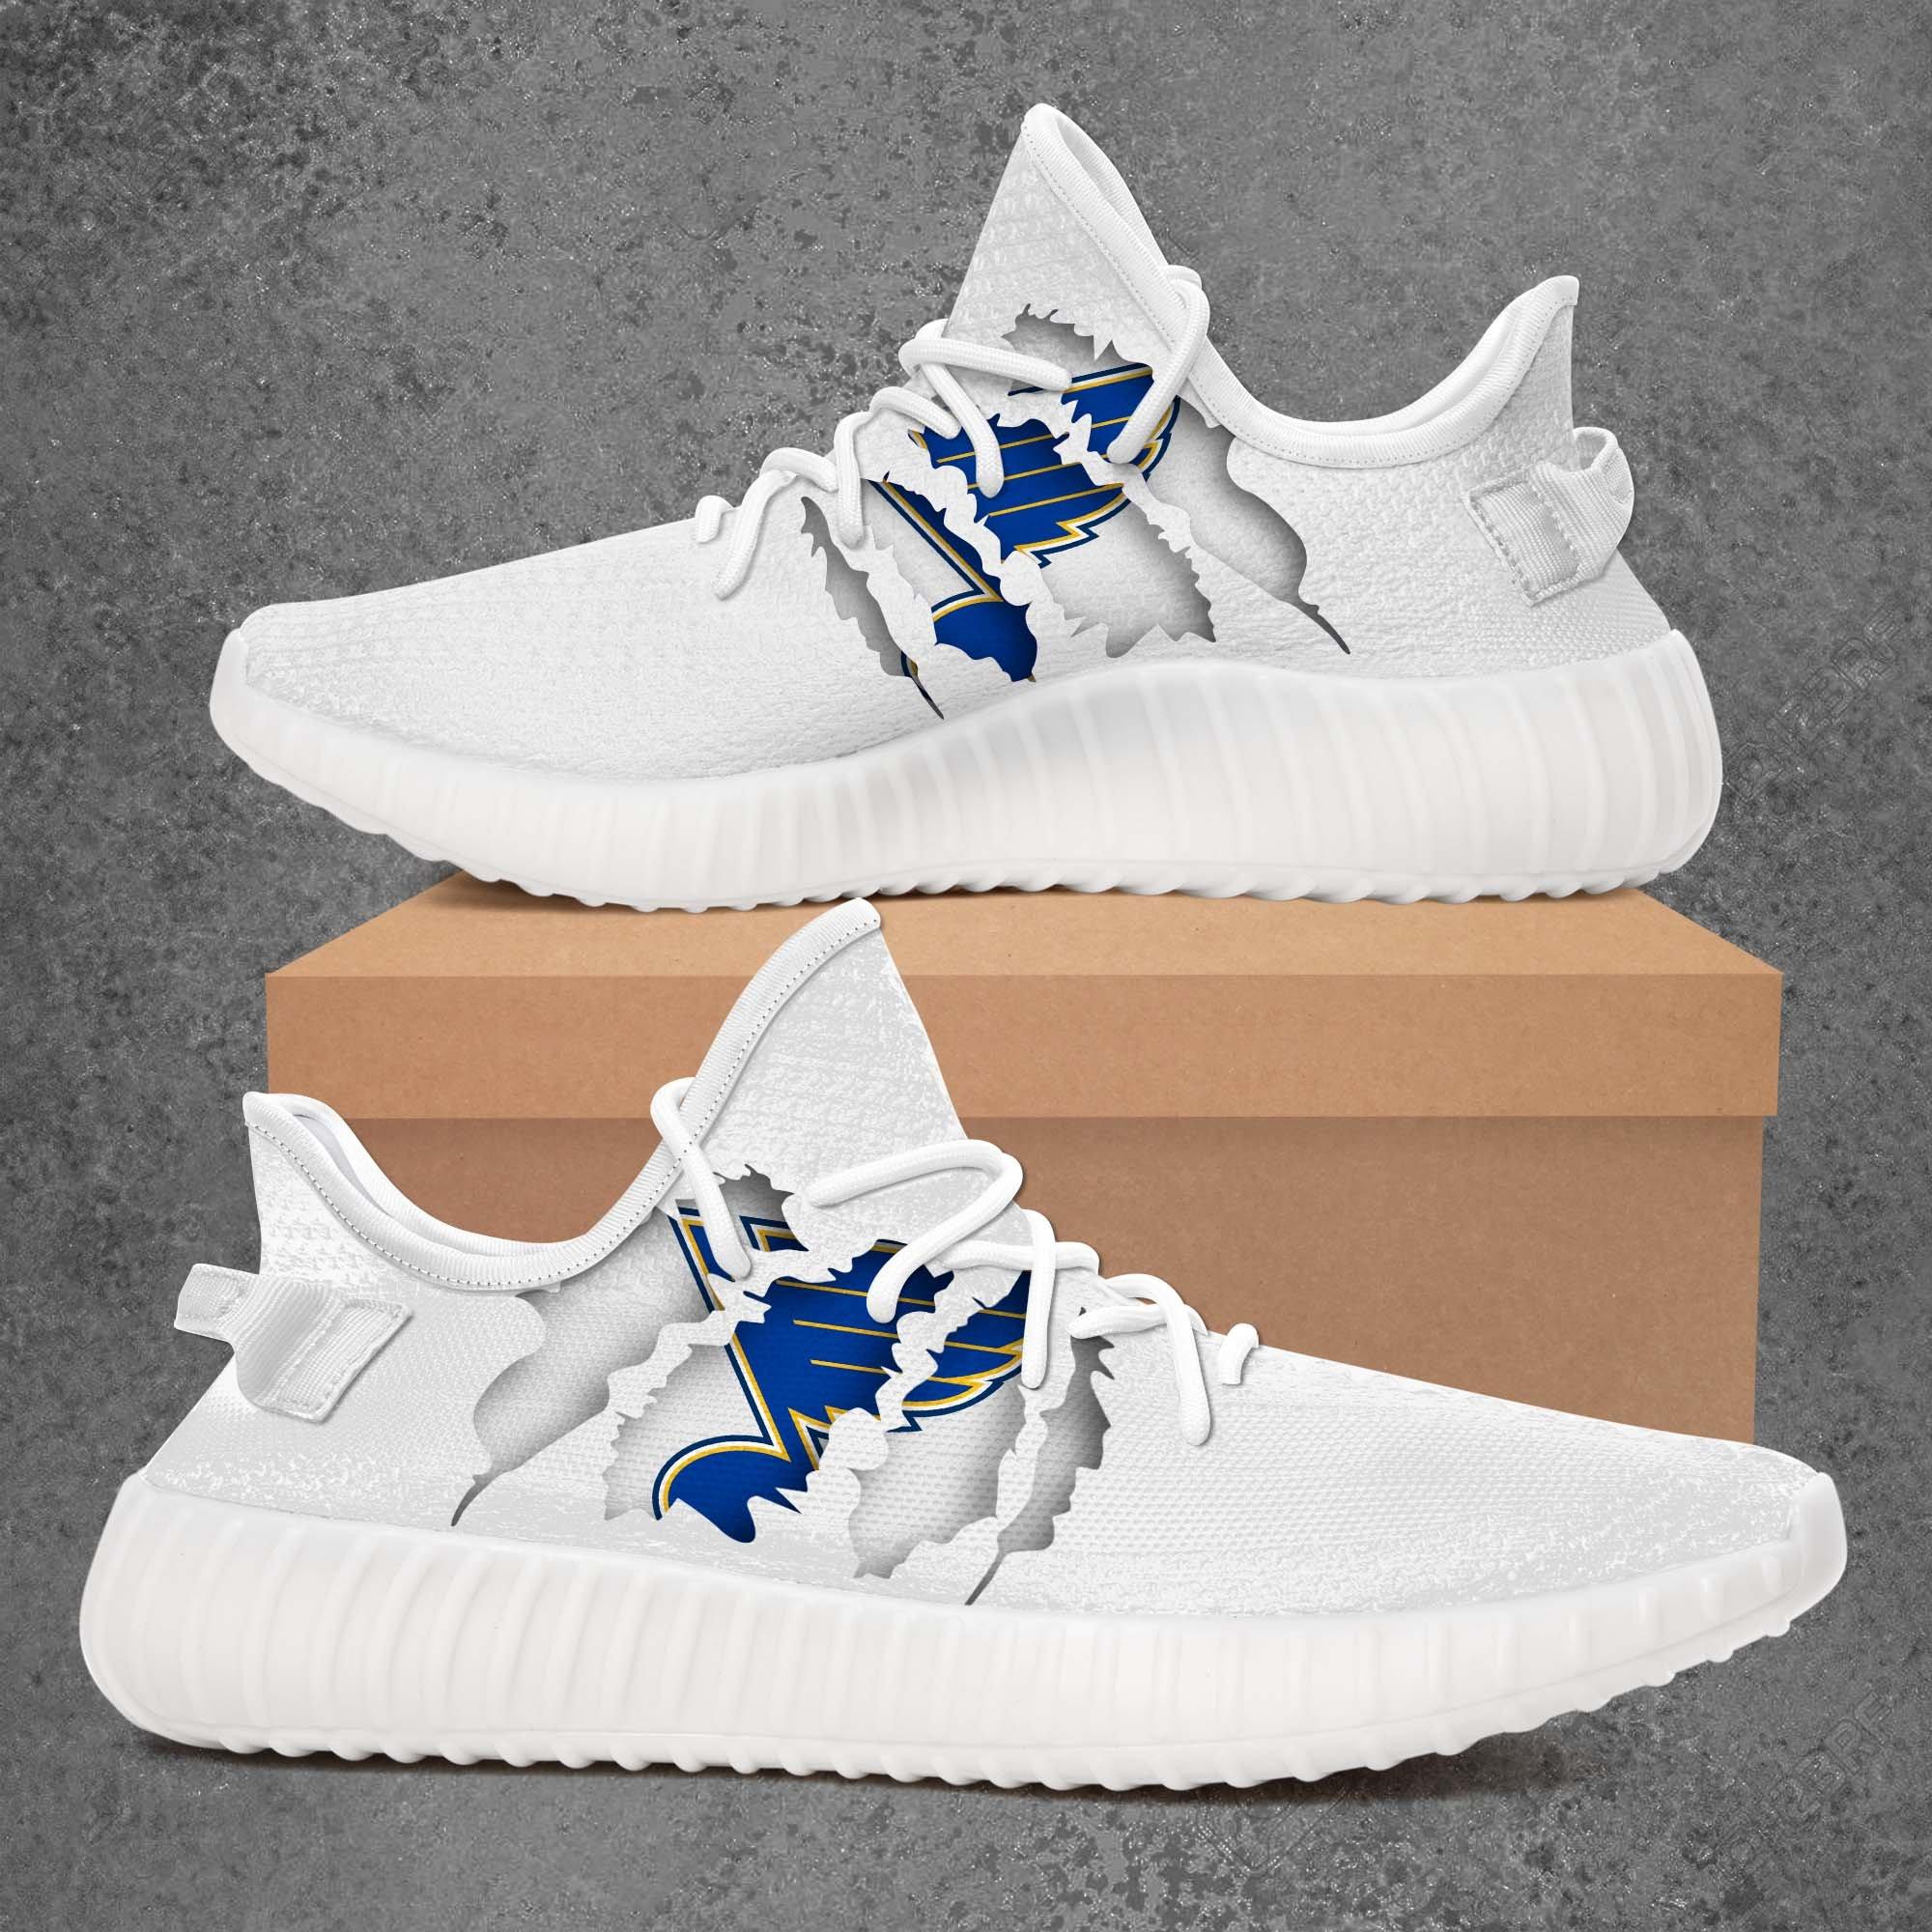 St. Louis Blues NHL Sport Teams Adidas Yeezy Boost 350 v2 Top Branding Trends 2019 – DIVAZA STORE